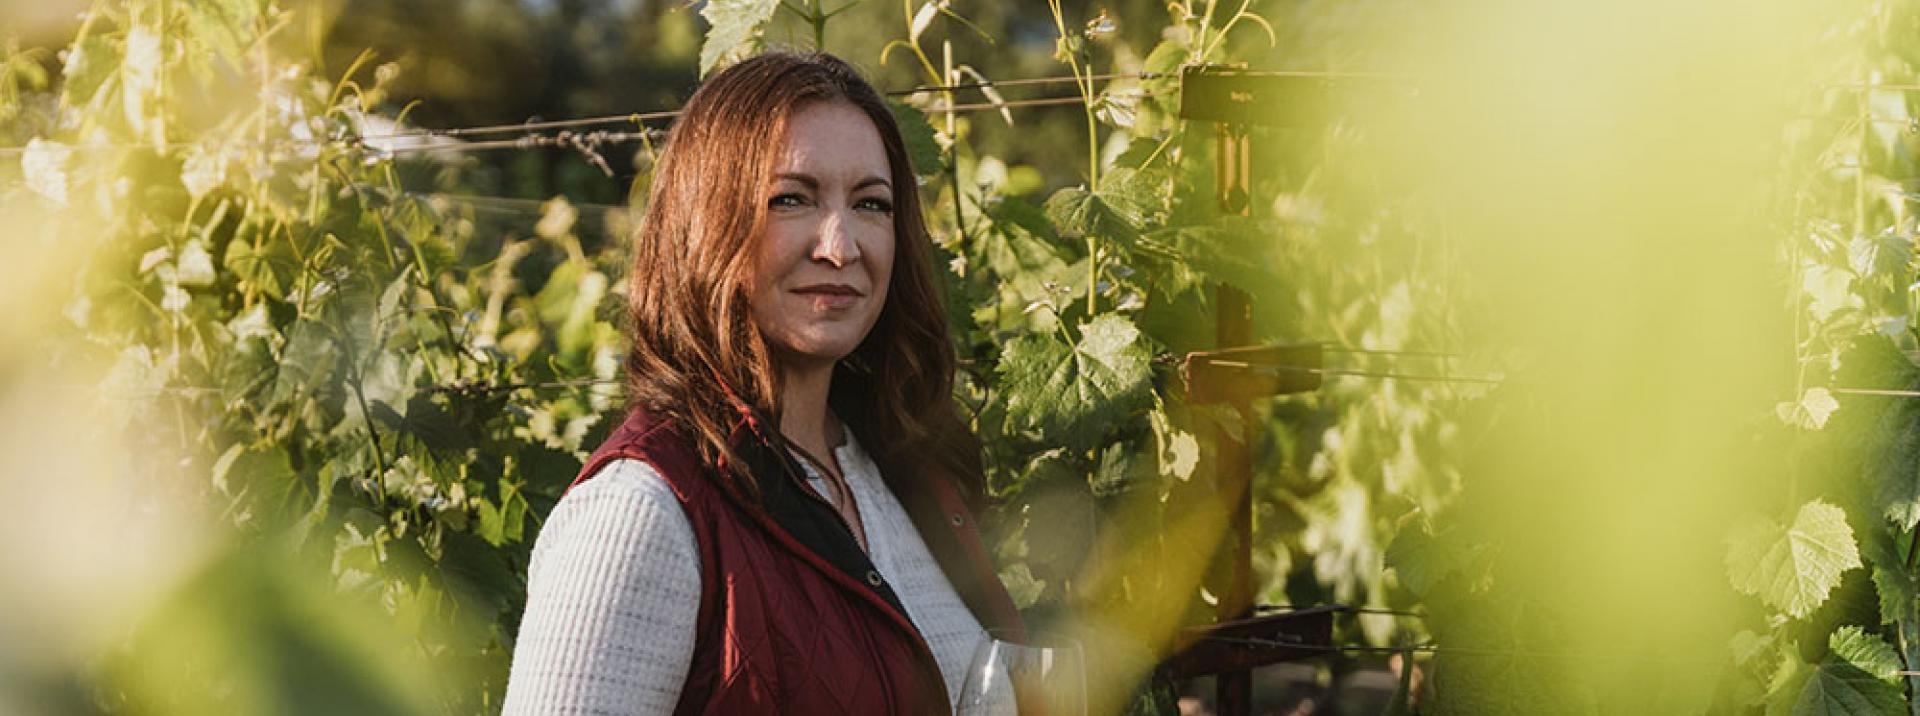 Kristy Melton among the vines at Freemark Abbey Winery